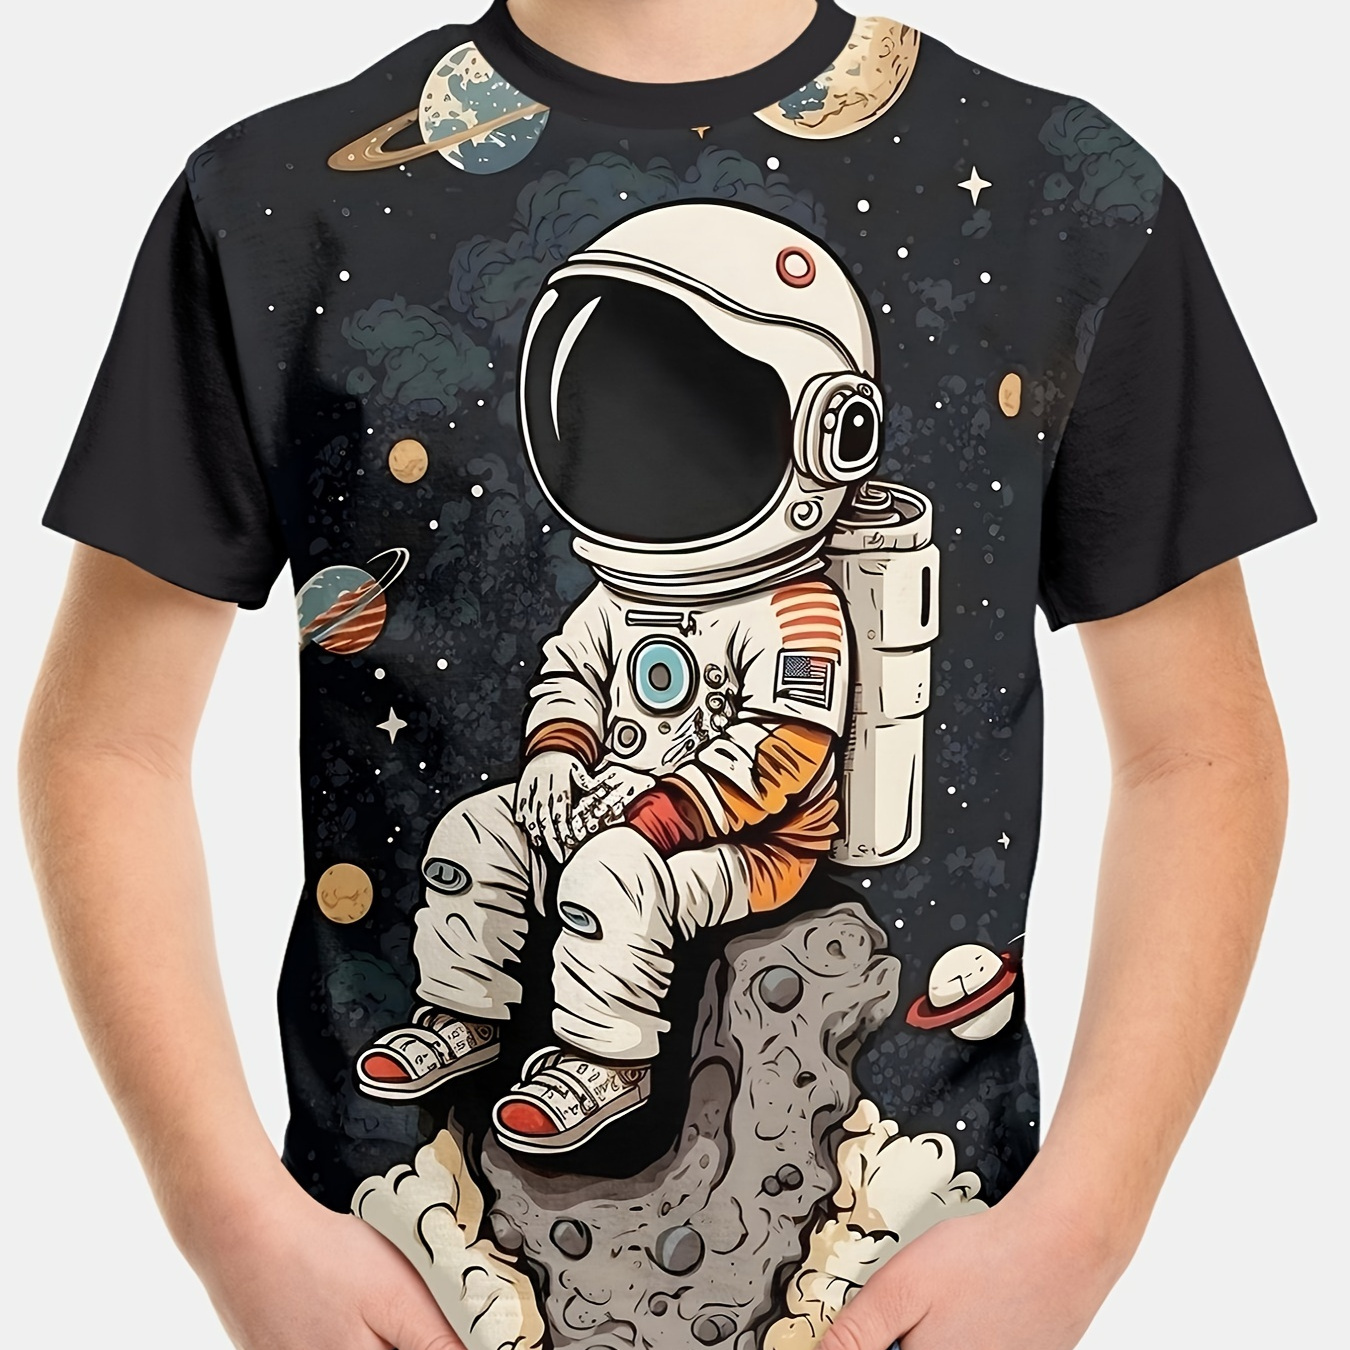 

Cartoon Space Astronaut 3d Print T-shirts For Boys - Cool, Lightweight And Comfy Summer Clothes!